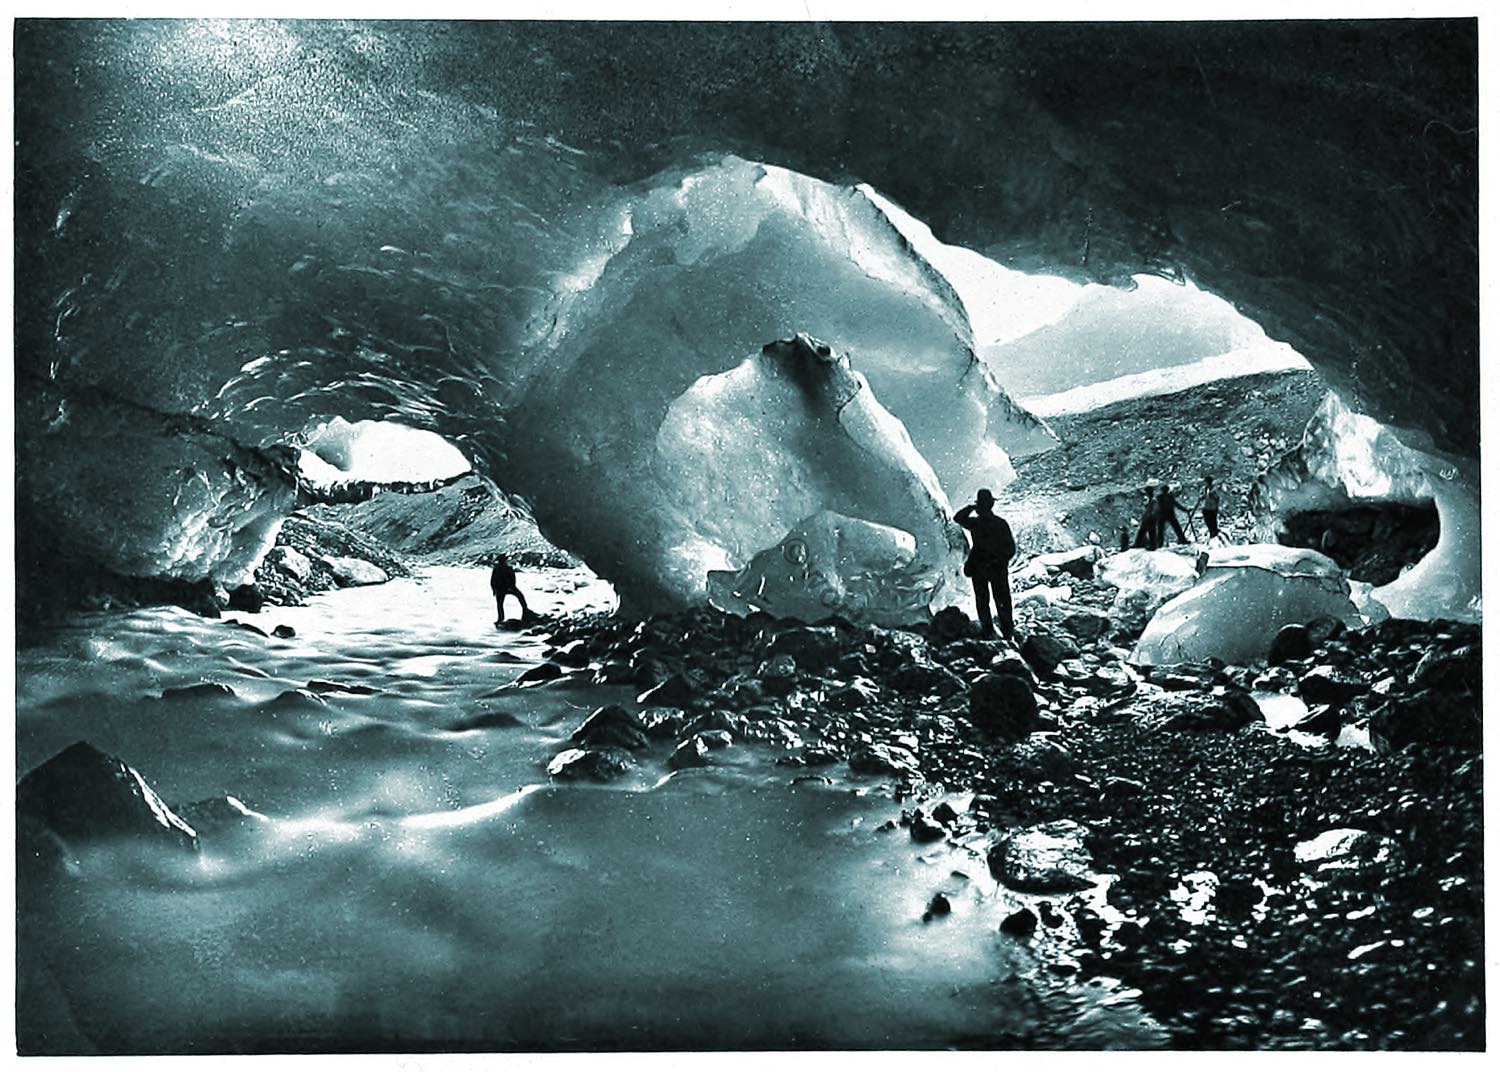 The Ice Cavern, or natural grotto of the Alpine world.